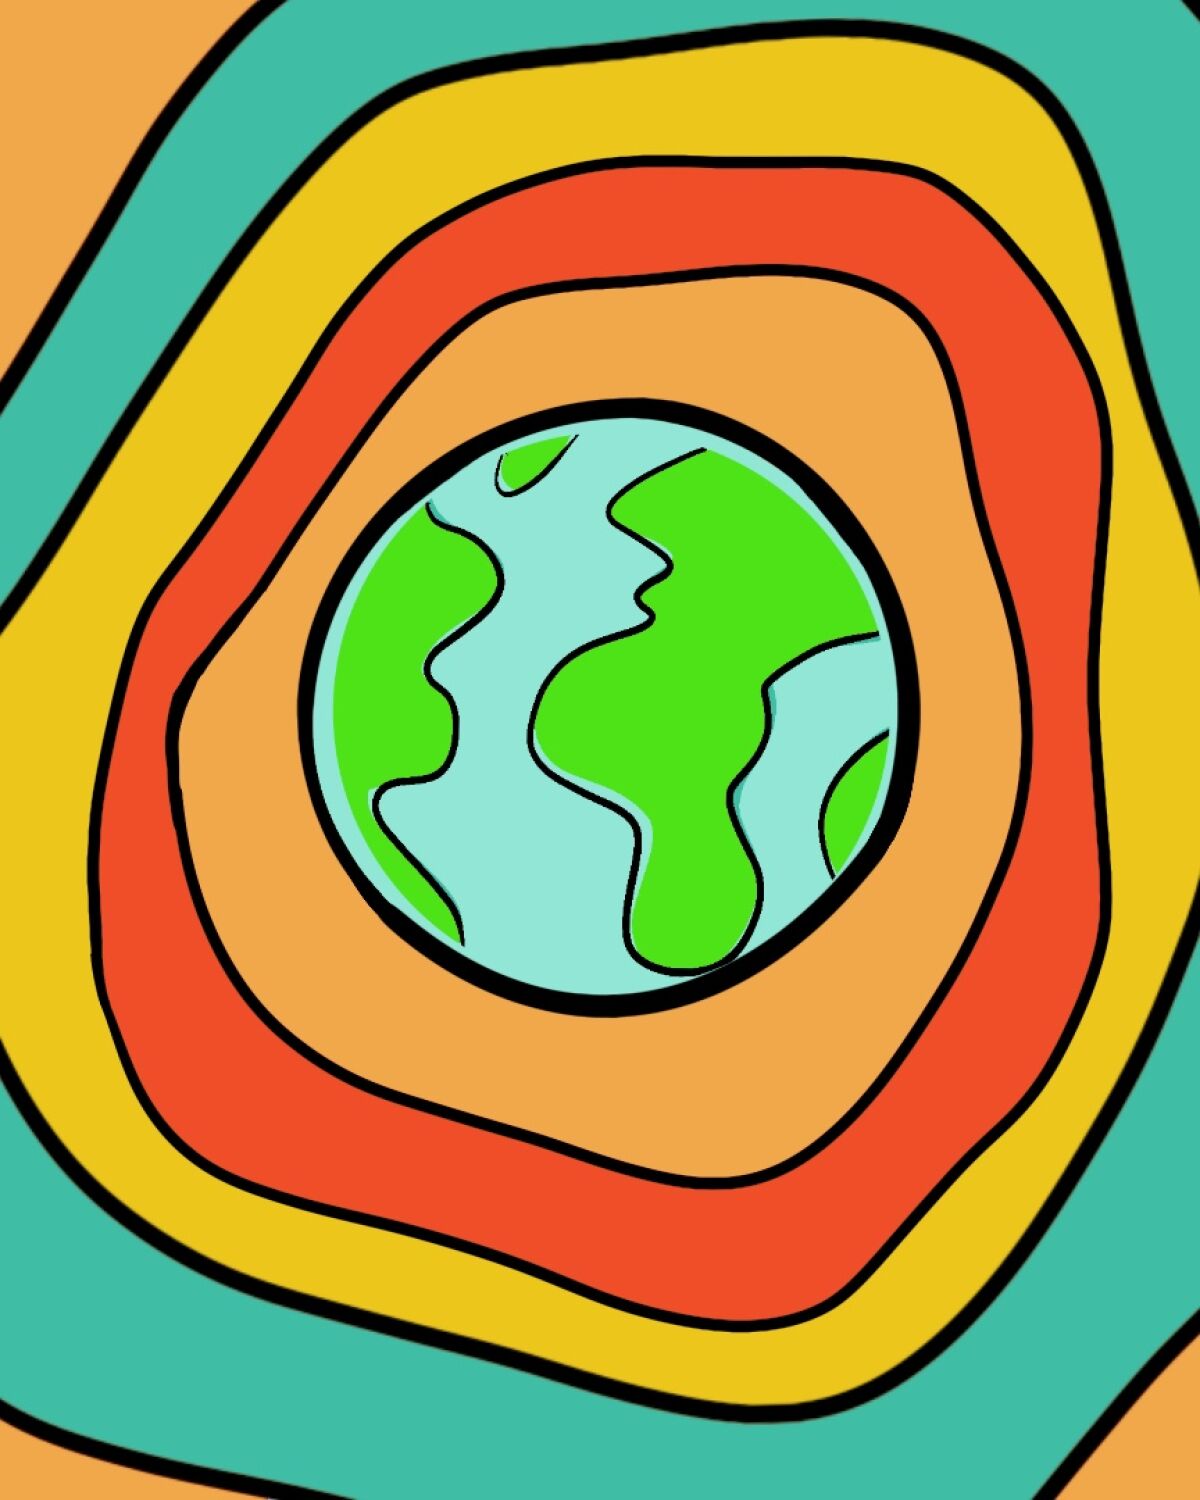 Illustration of earth surrounded by streams of colors.